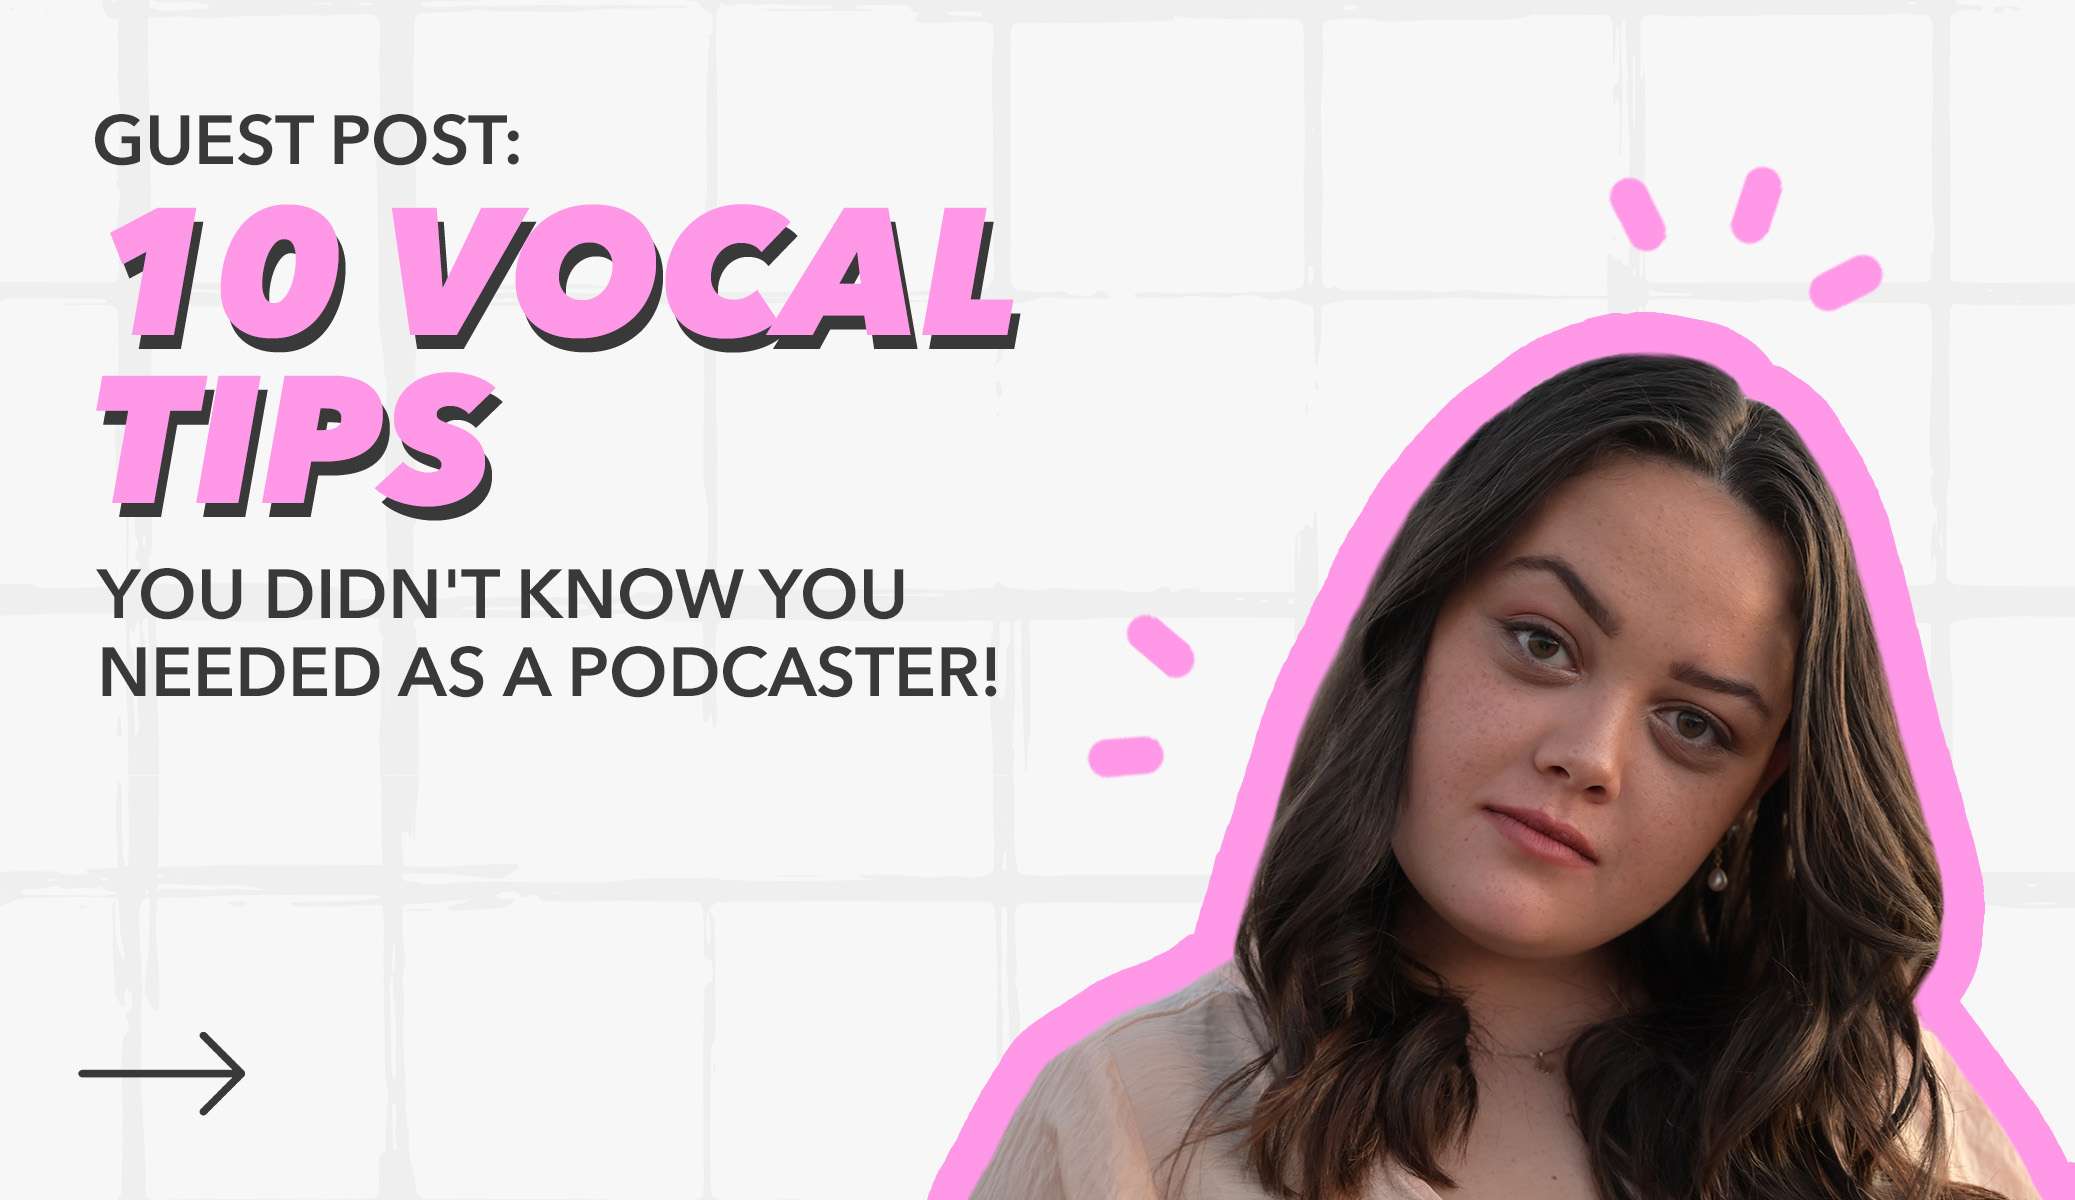 Podcasters! Here are the 10 Vocal Tips You Didn’t Know You Needed!